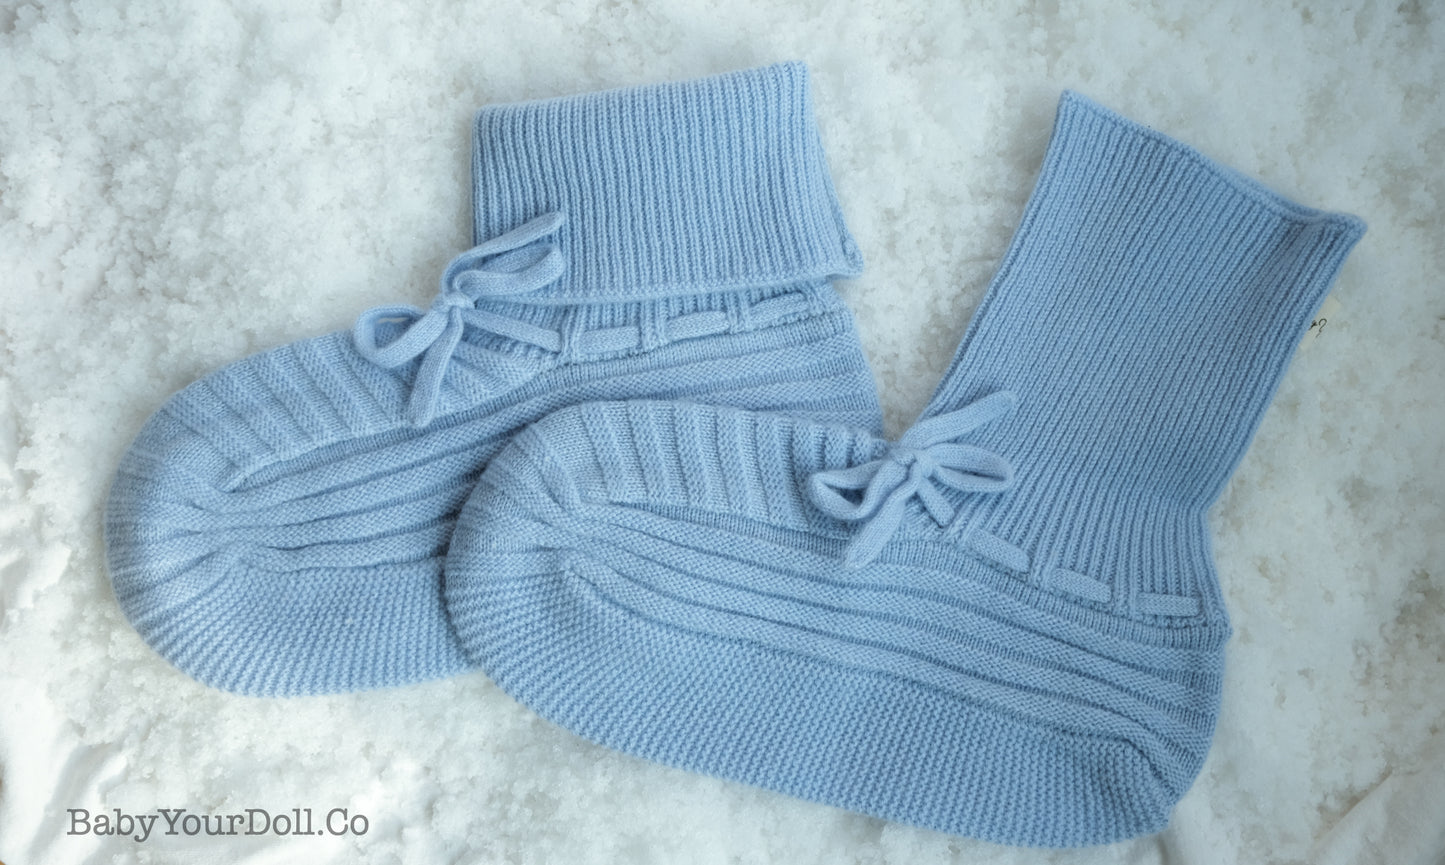 Cashmere Adult Knit Baby Booties| Blue